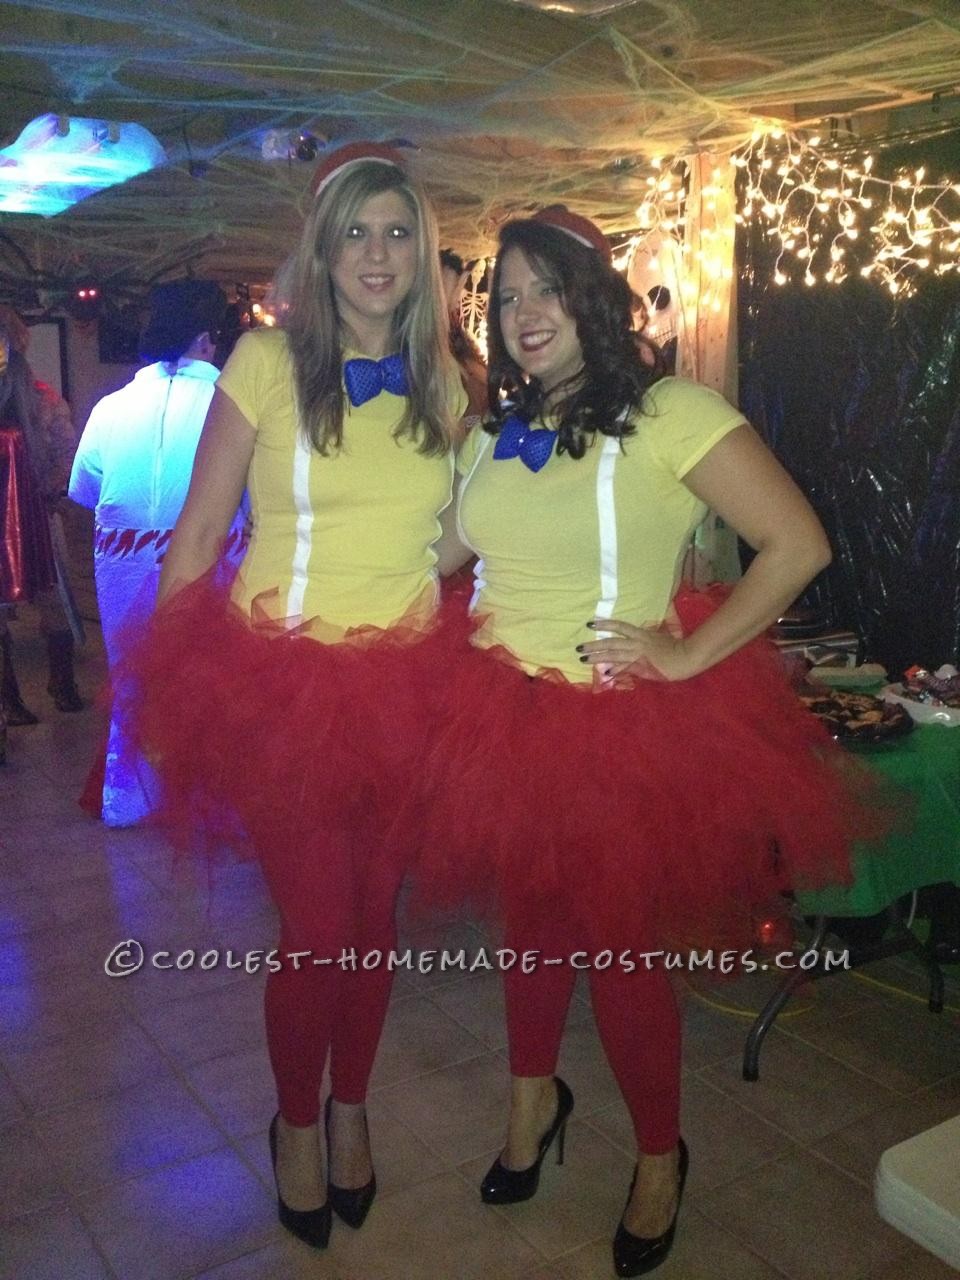 Easy Homemade Tweedle Dum and Tweedle Dee Halloween Couple Costumes: My friend and I really wanted to wear tutu's to a Halloween party this year! We did some internet searching and decided to be Tweedle Dum and Tweedle